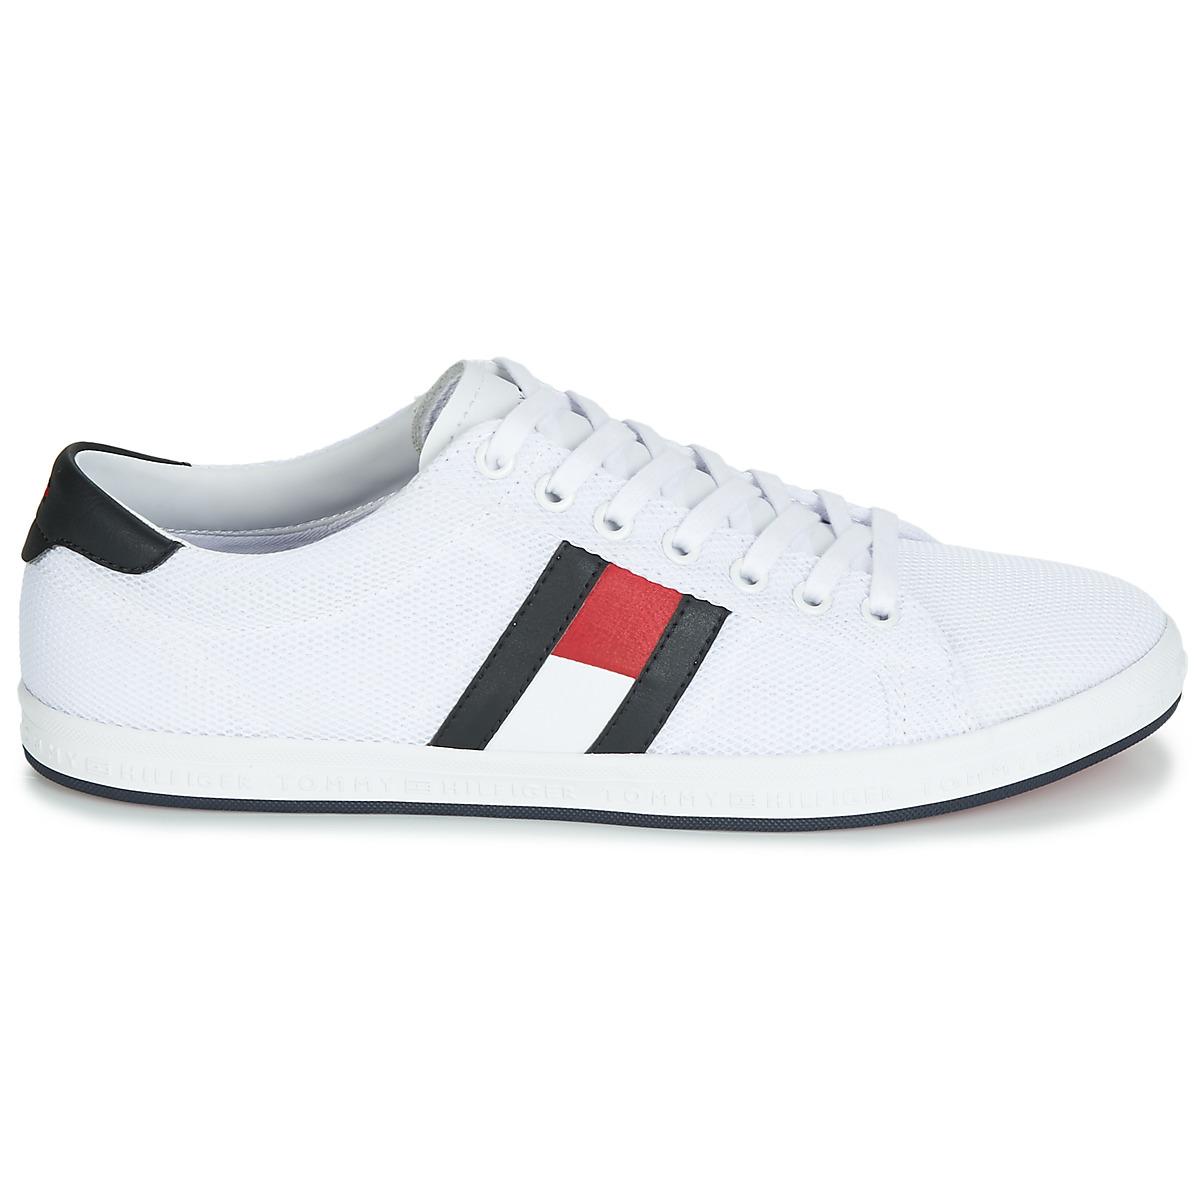 Tommy Hilfiger Howell 7d2 Men's Shoes (trainers) In White for Men - Lyst